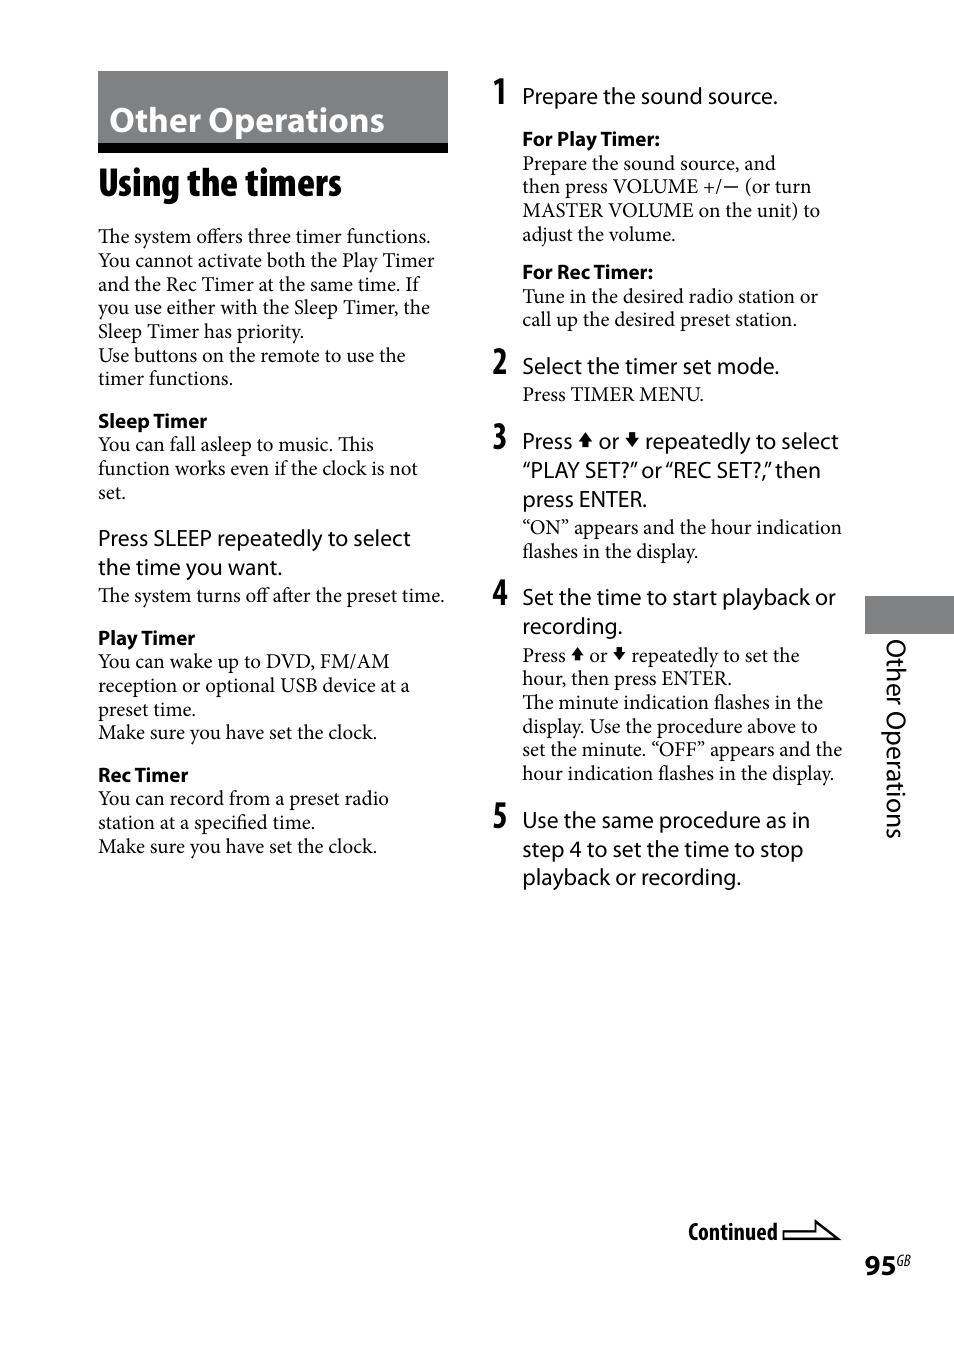 Other operations, Using the timers | Sony LBT-LCD77Di User Manual | Page 95 / 143